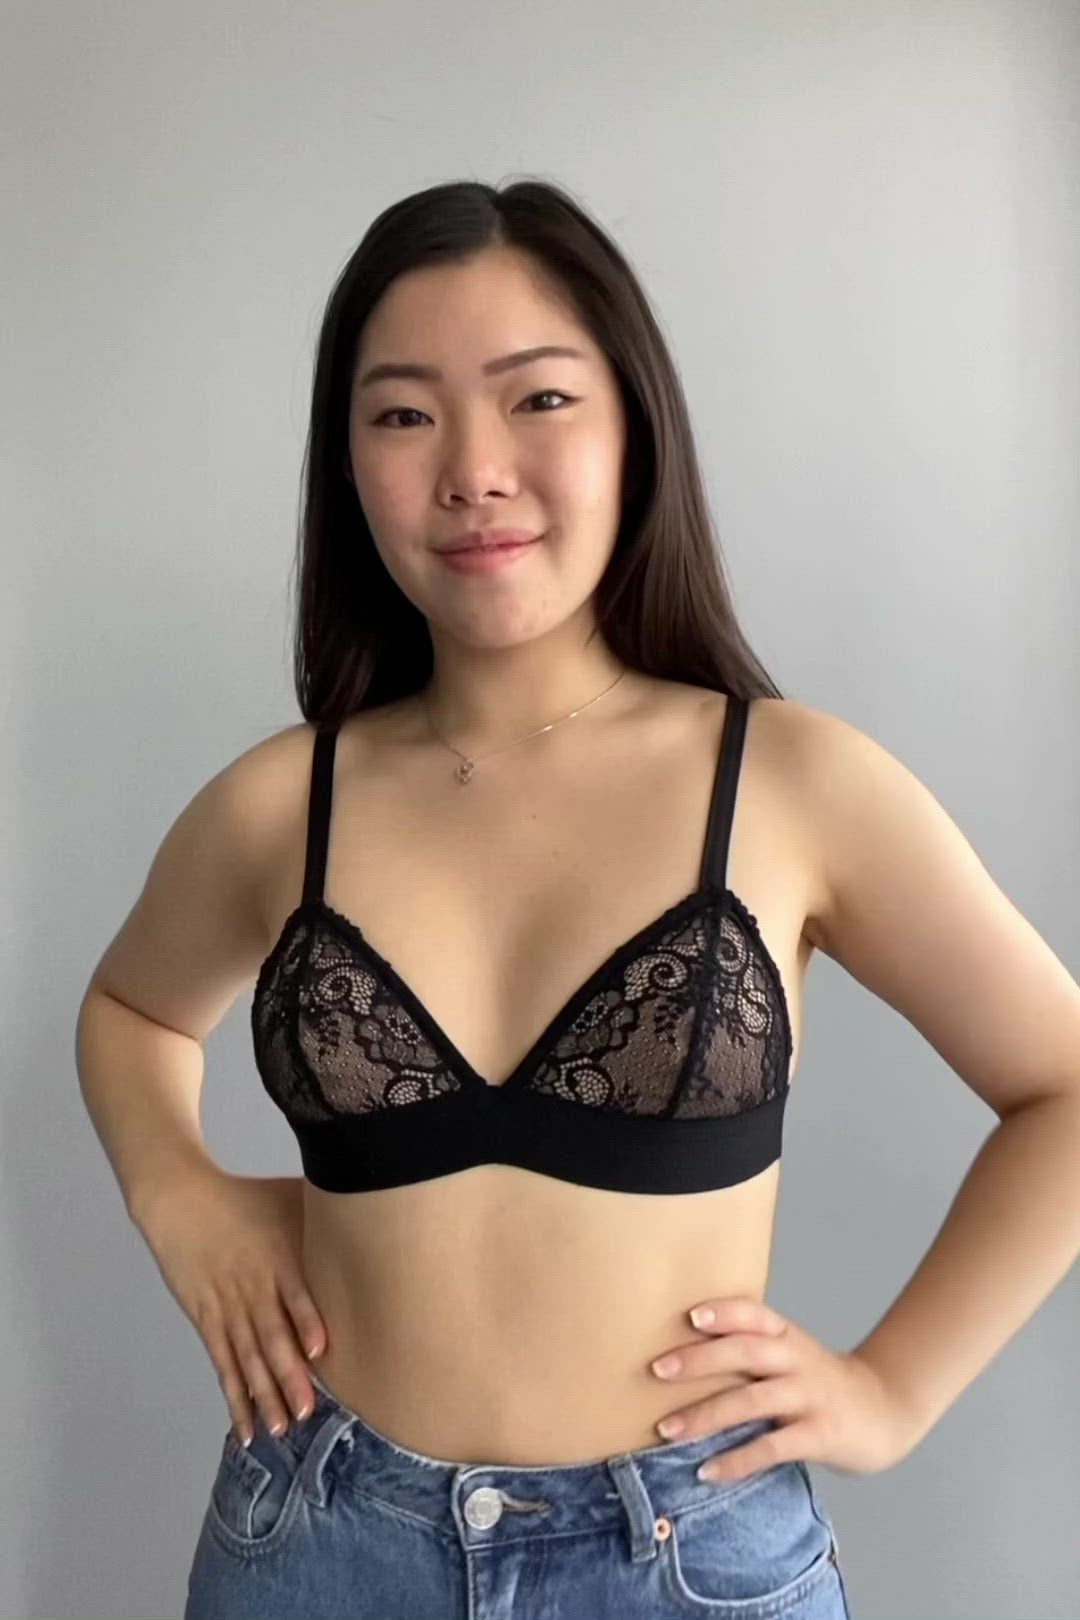 The best bra brands made for small breasted women